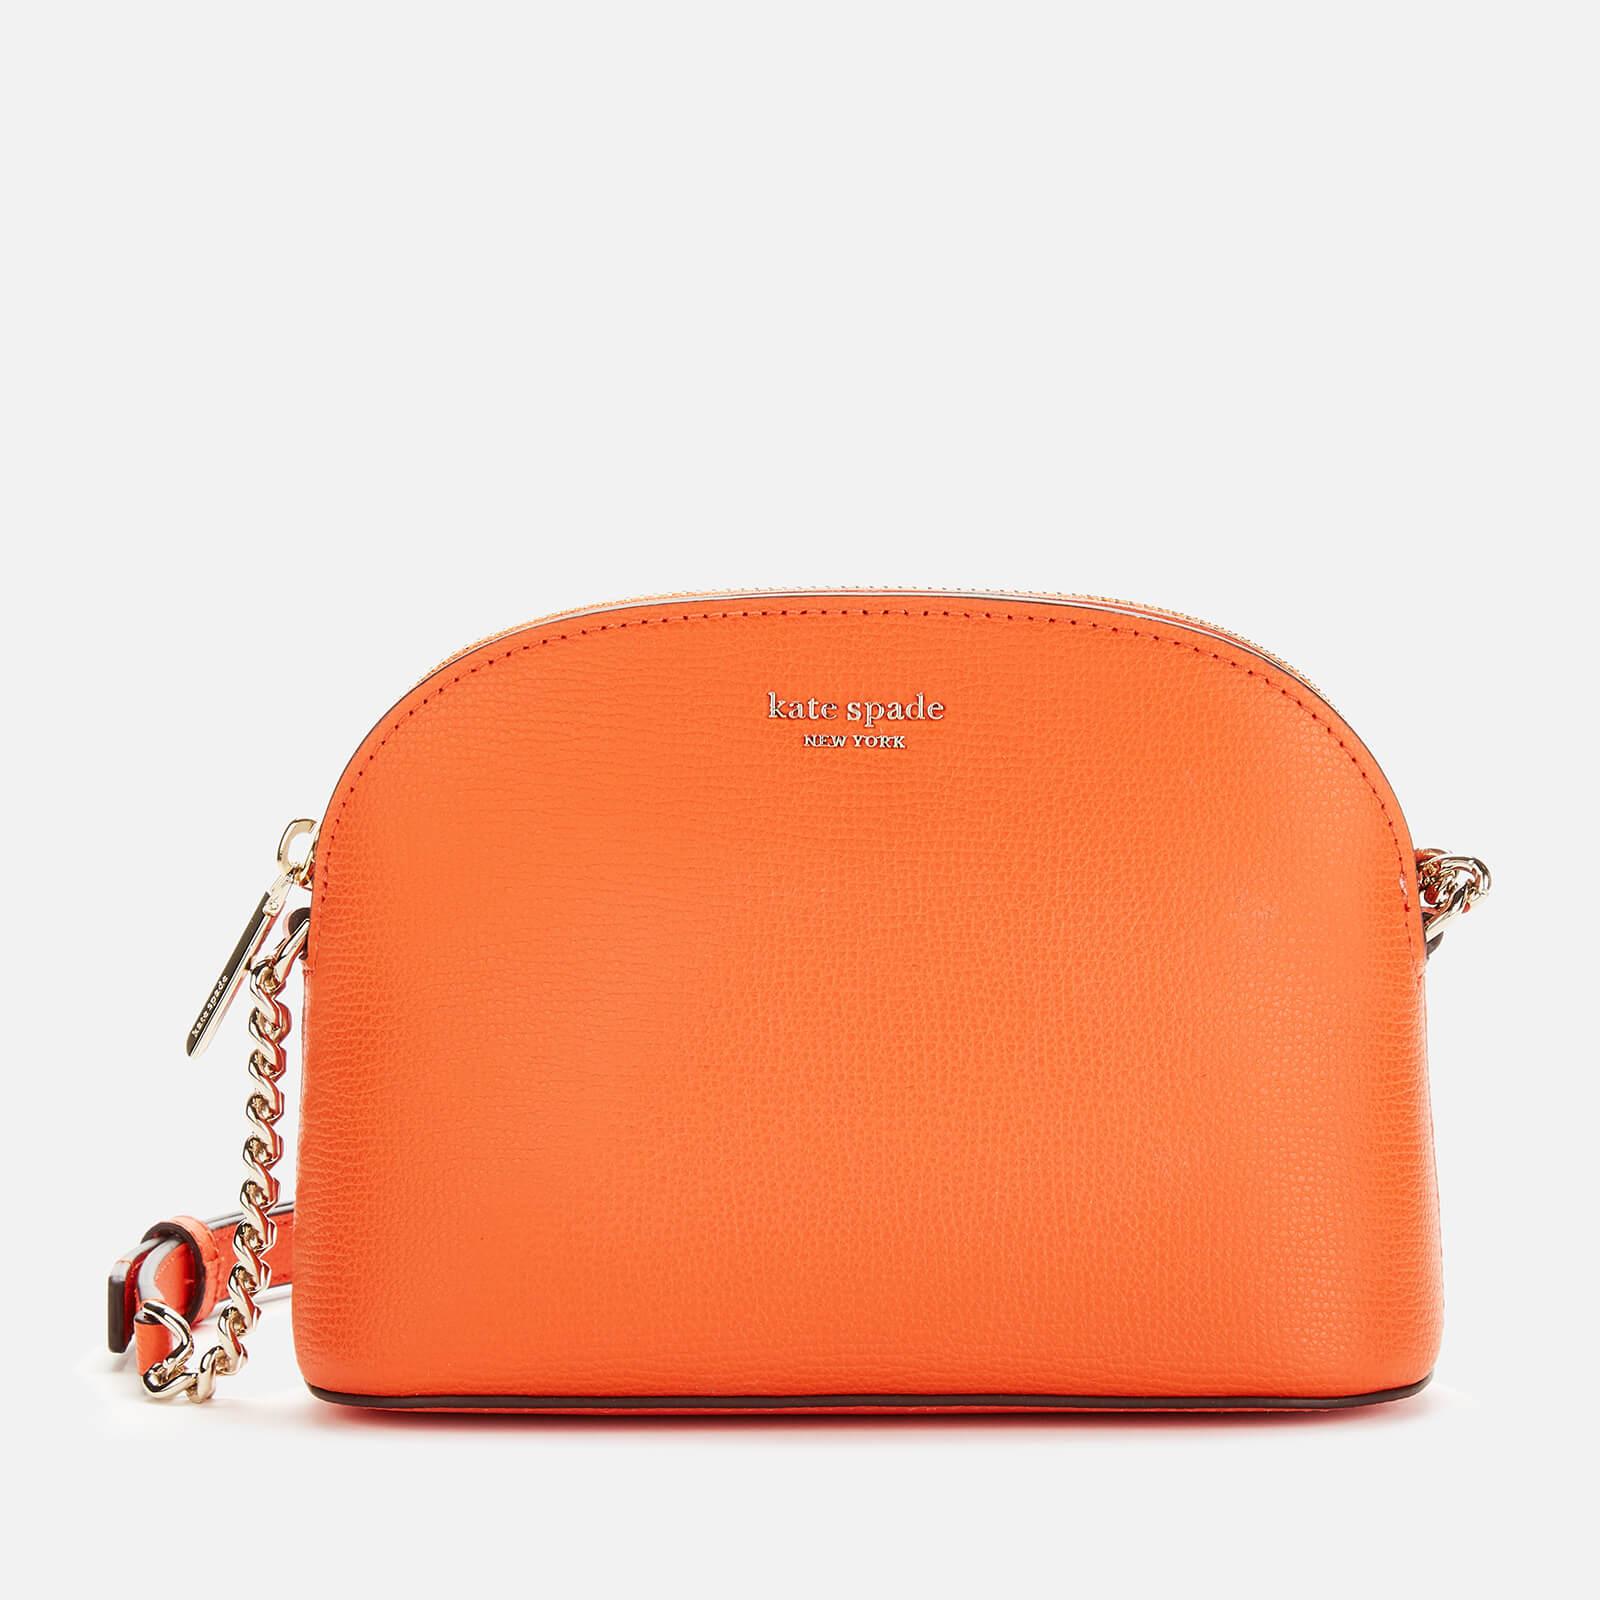 Kate Spade Leather Sylvia Small Dome Cross Body Bag in Orange - Lyst